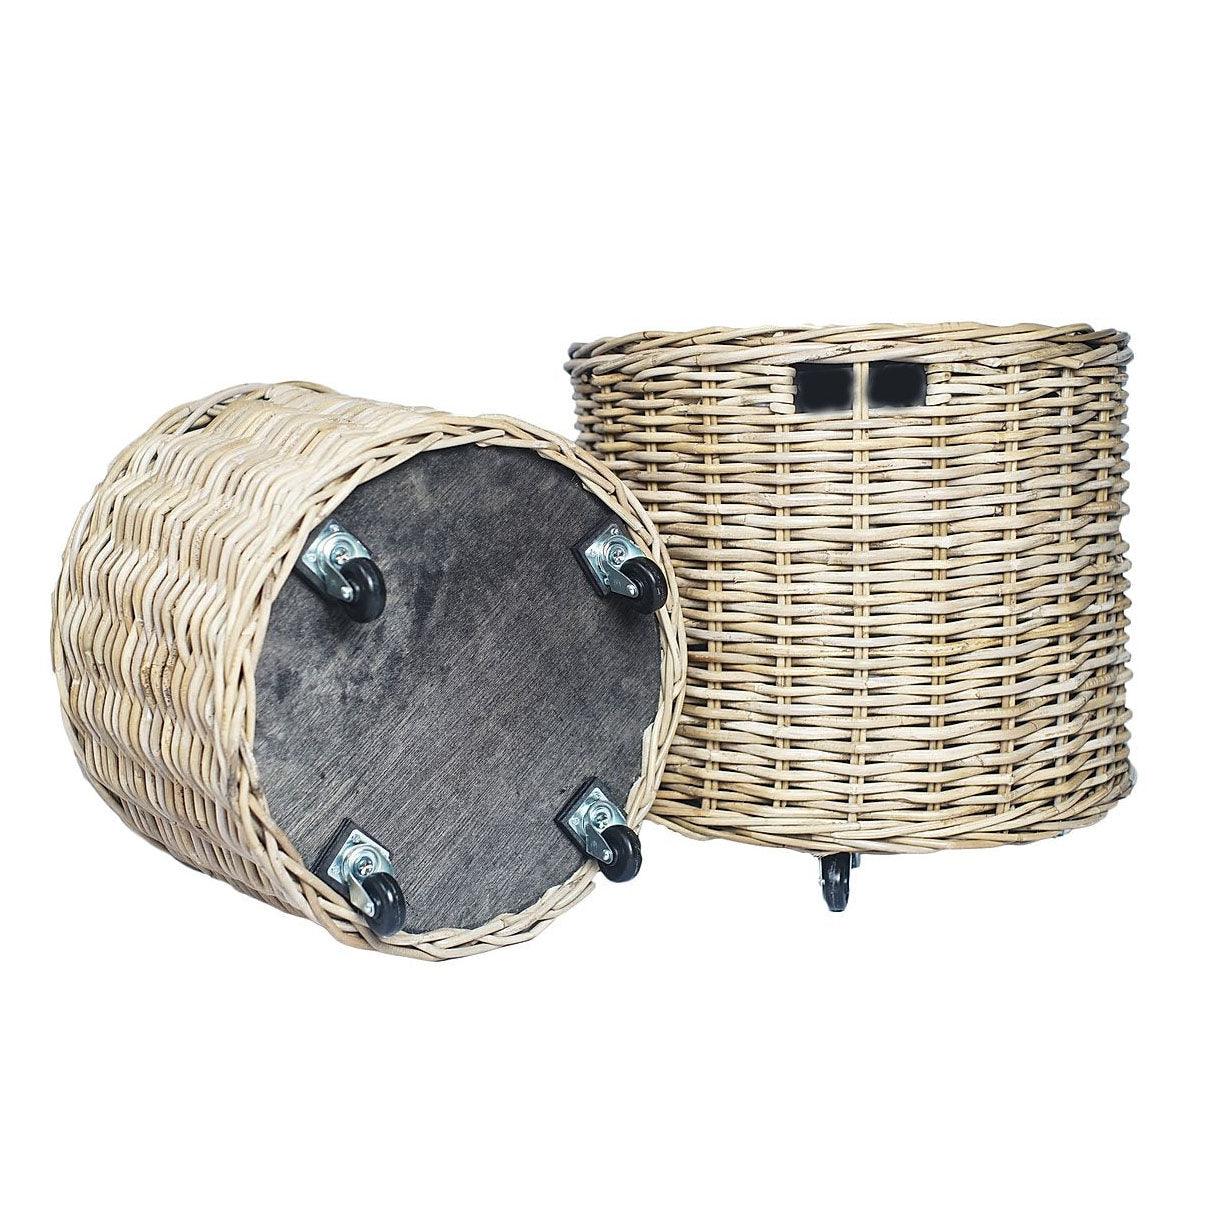 https://rosesttradingco.com.au/cdn/shop/files/round-baskets-on-wheels-ready-to-ship-from-rose-st-trading-co.jpg?v=1692185932